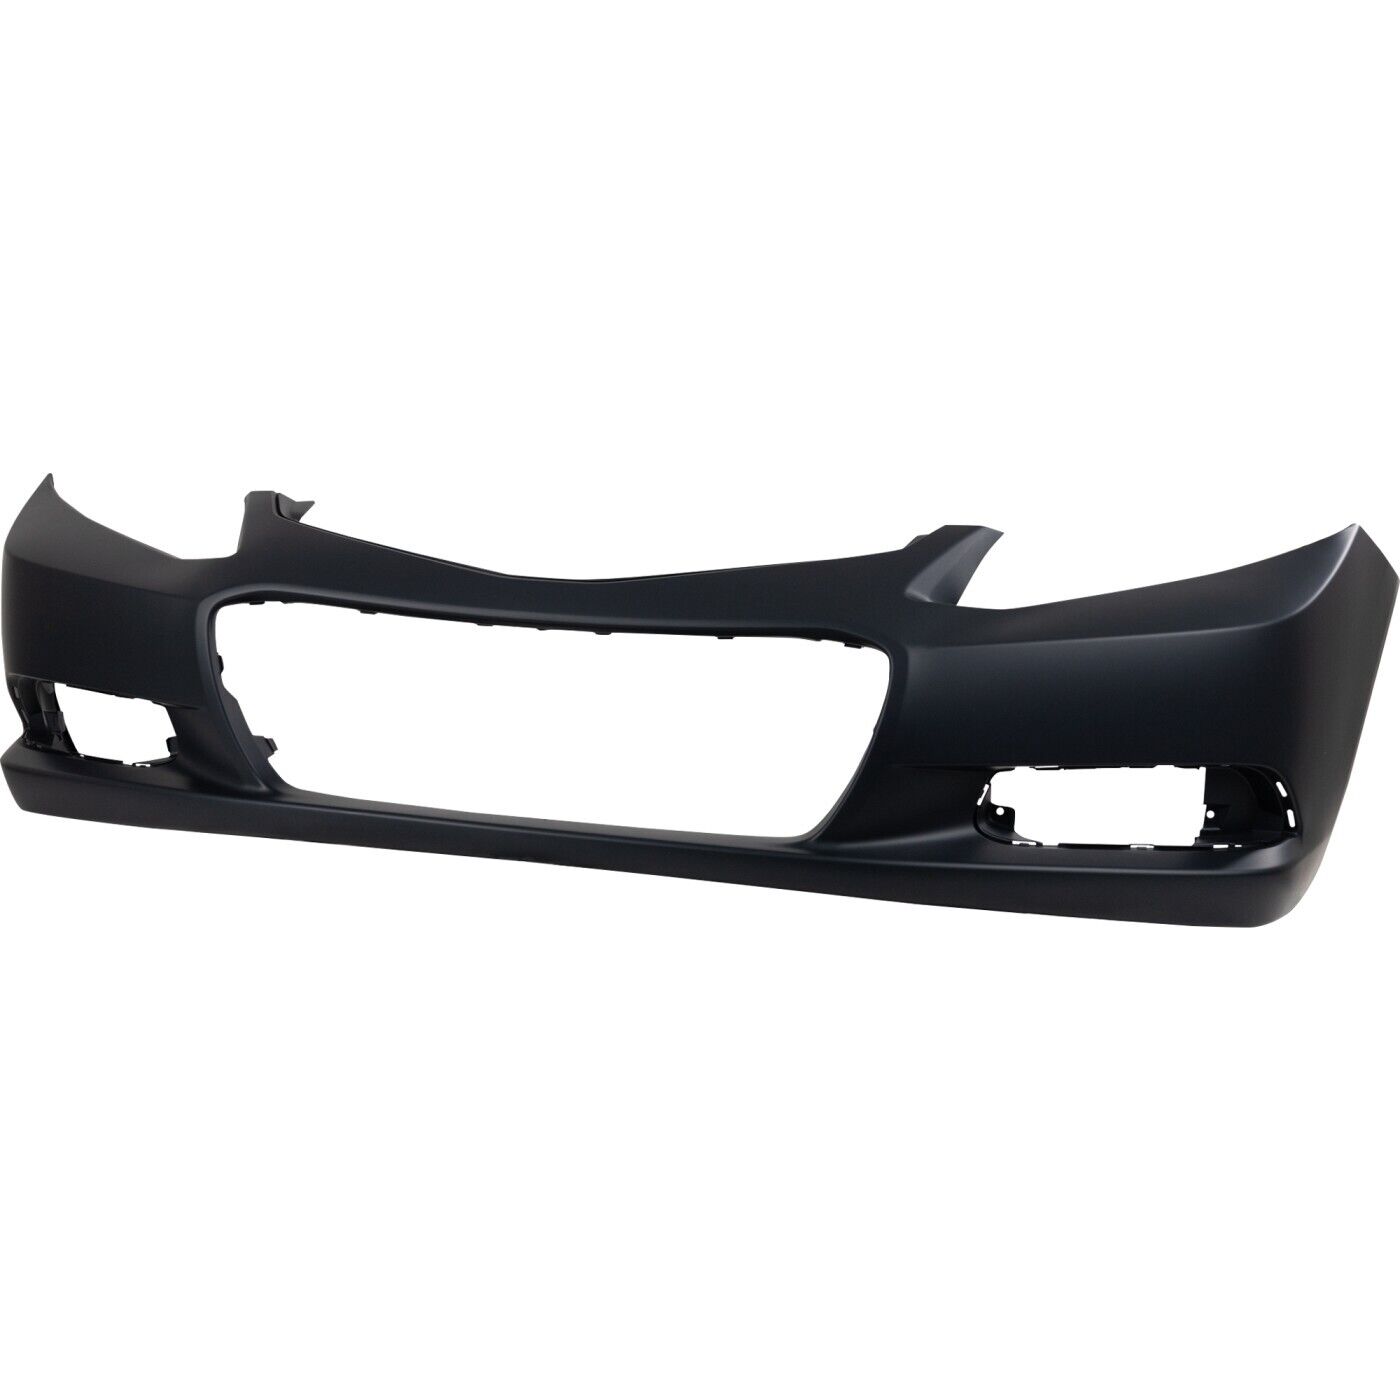 Front Bumper Cover For 2012-2013 Honda Civic Coupe w/ fog lamp holes Primed CAPA